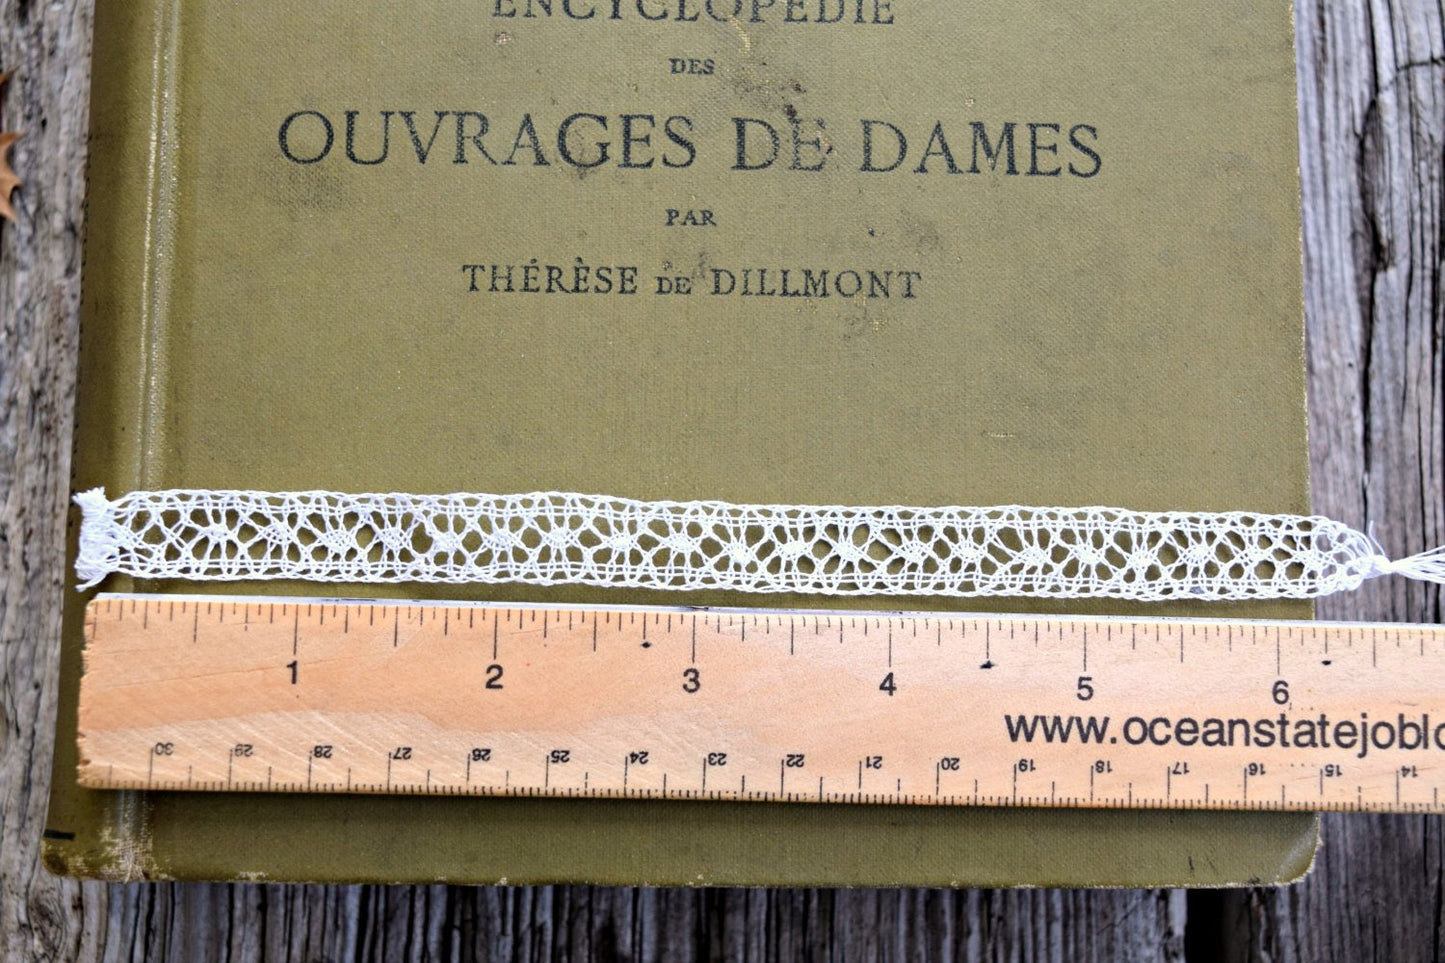 Handmade bobbin lace on book with ruler showing size - approximately three repeats per inch and half inch wide